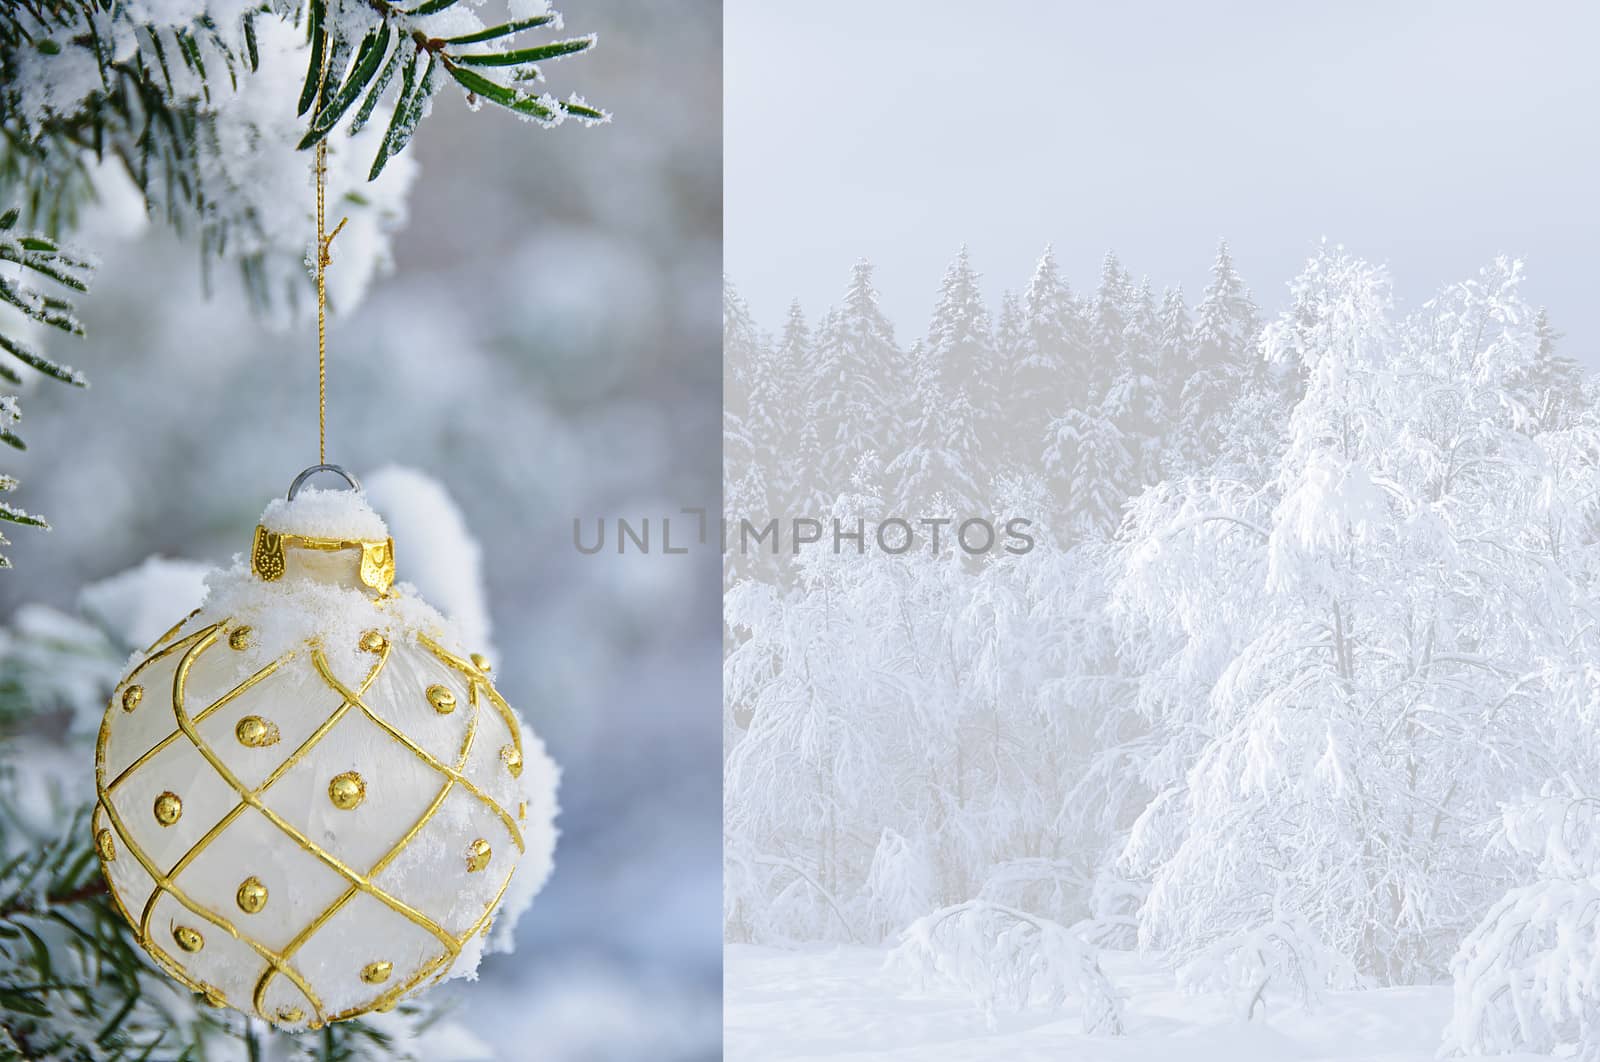 Christmas note with a snow covered ornament bulb hanging in a tre divided by a winter forest image.